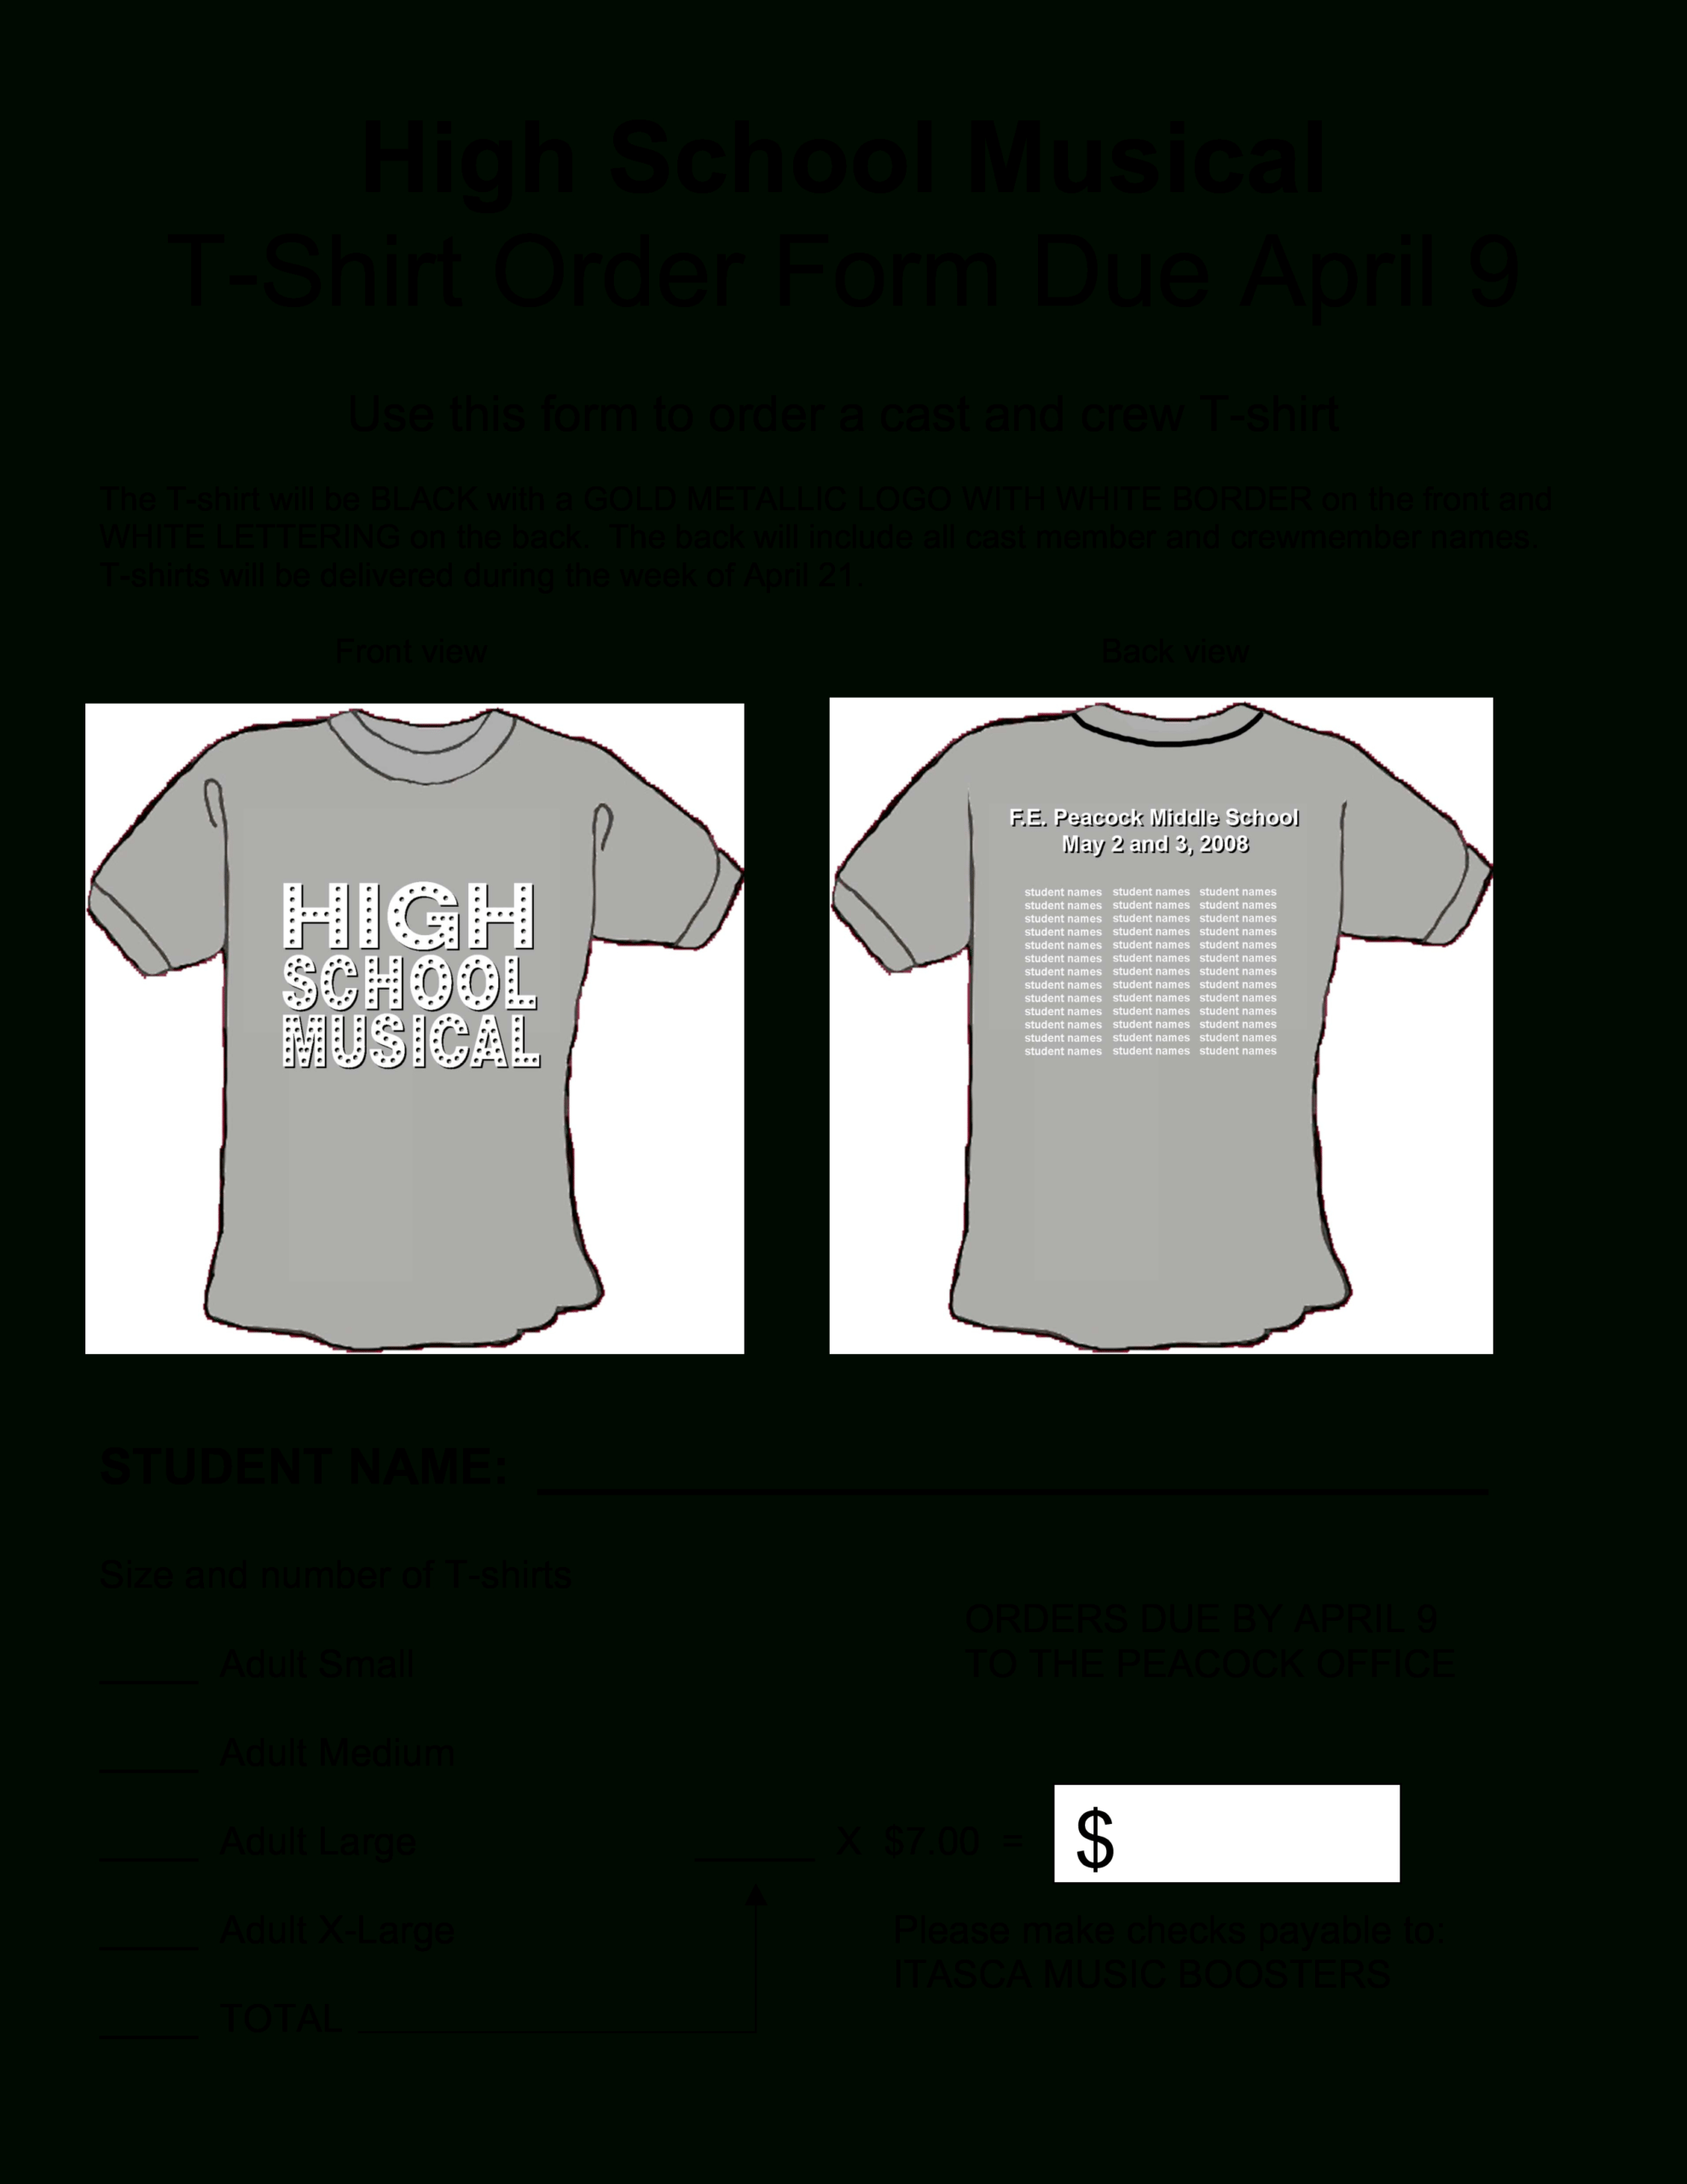 High School T Shirt Order Form | Templates At Intended For Blank T Shirt Order Form Template